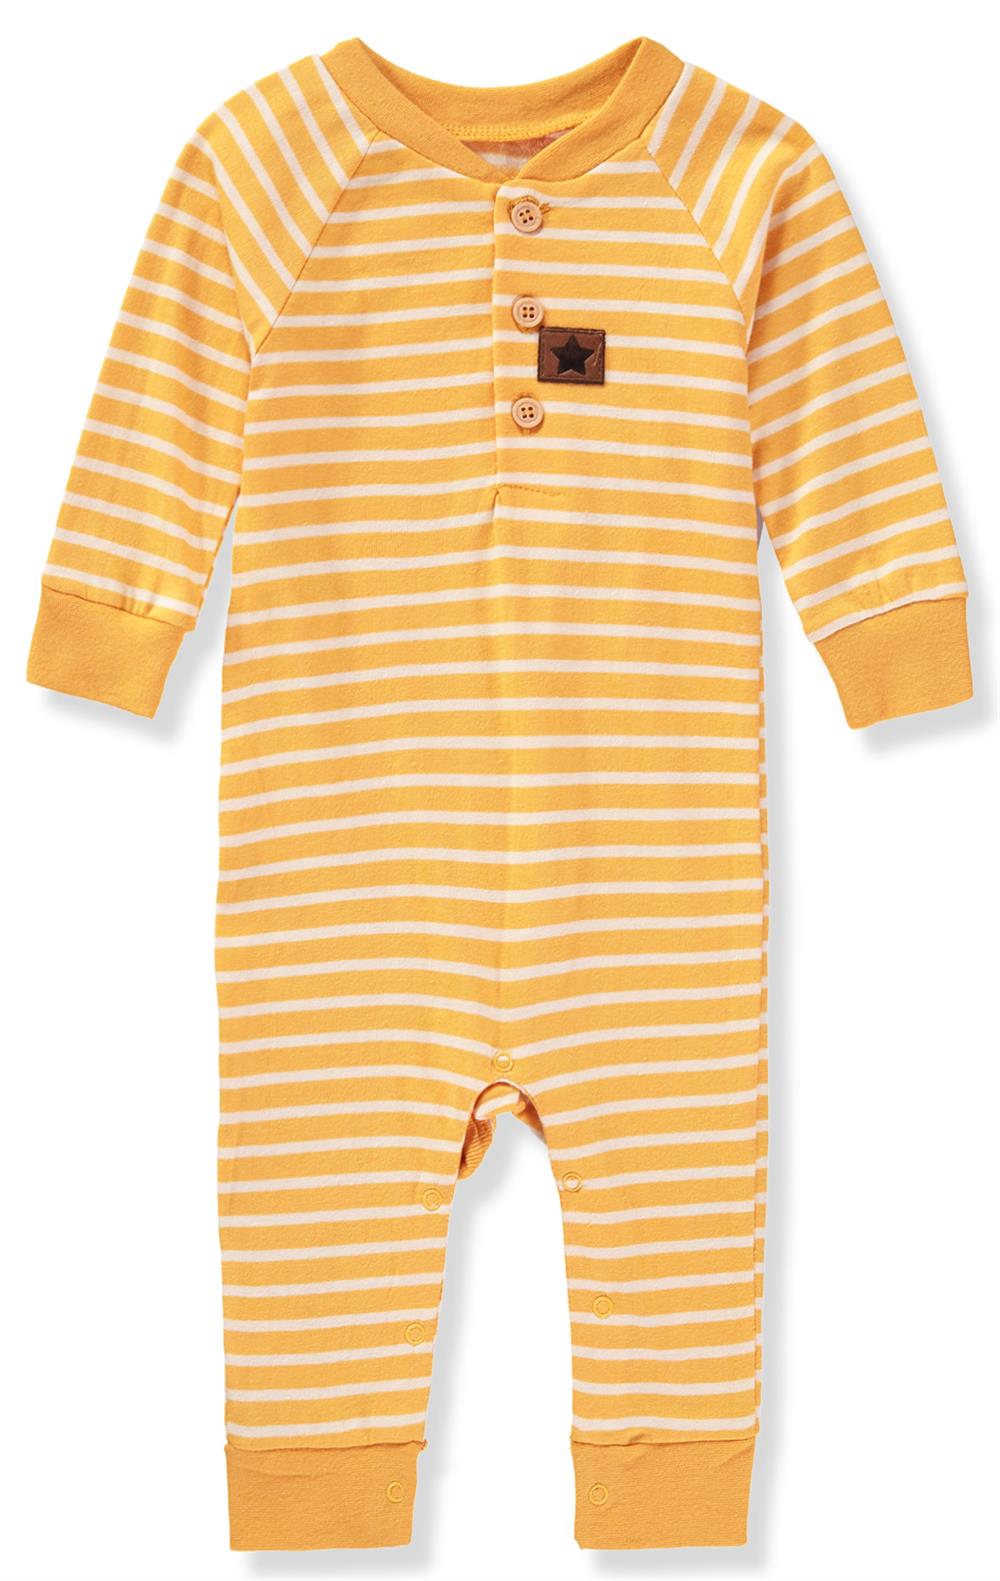 Rene Rofe Baby Boys 0-9 Months Coverall